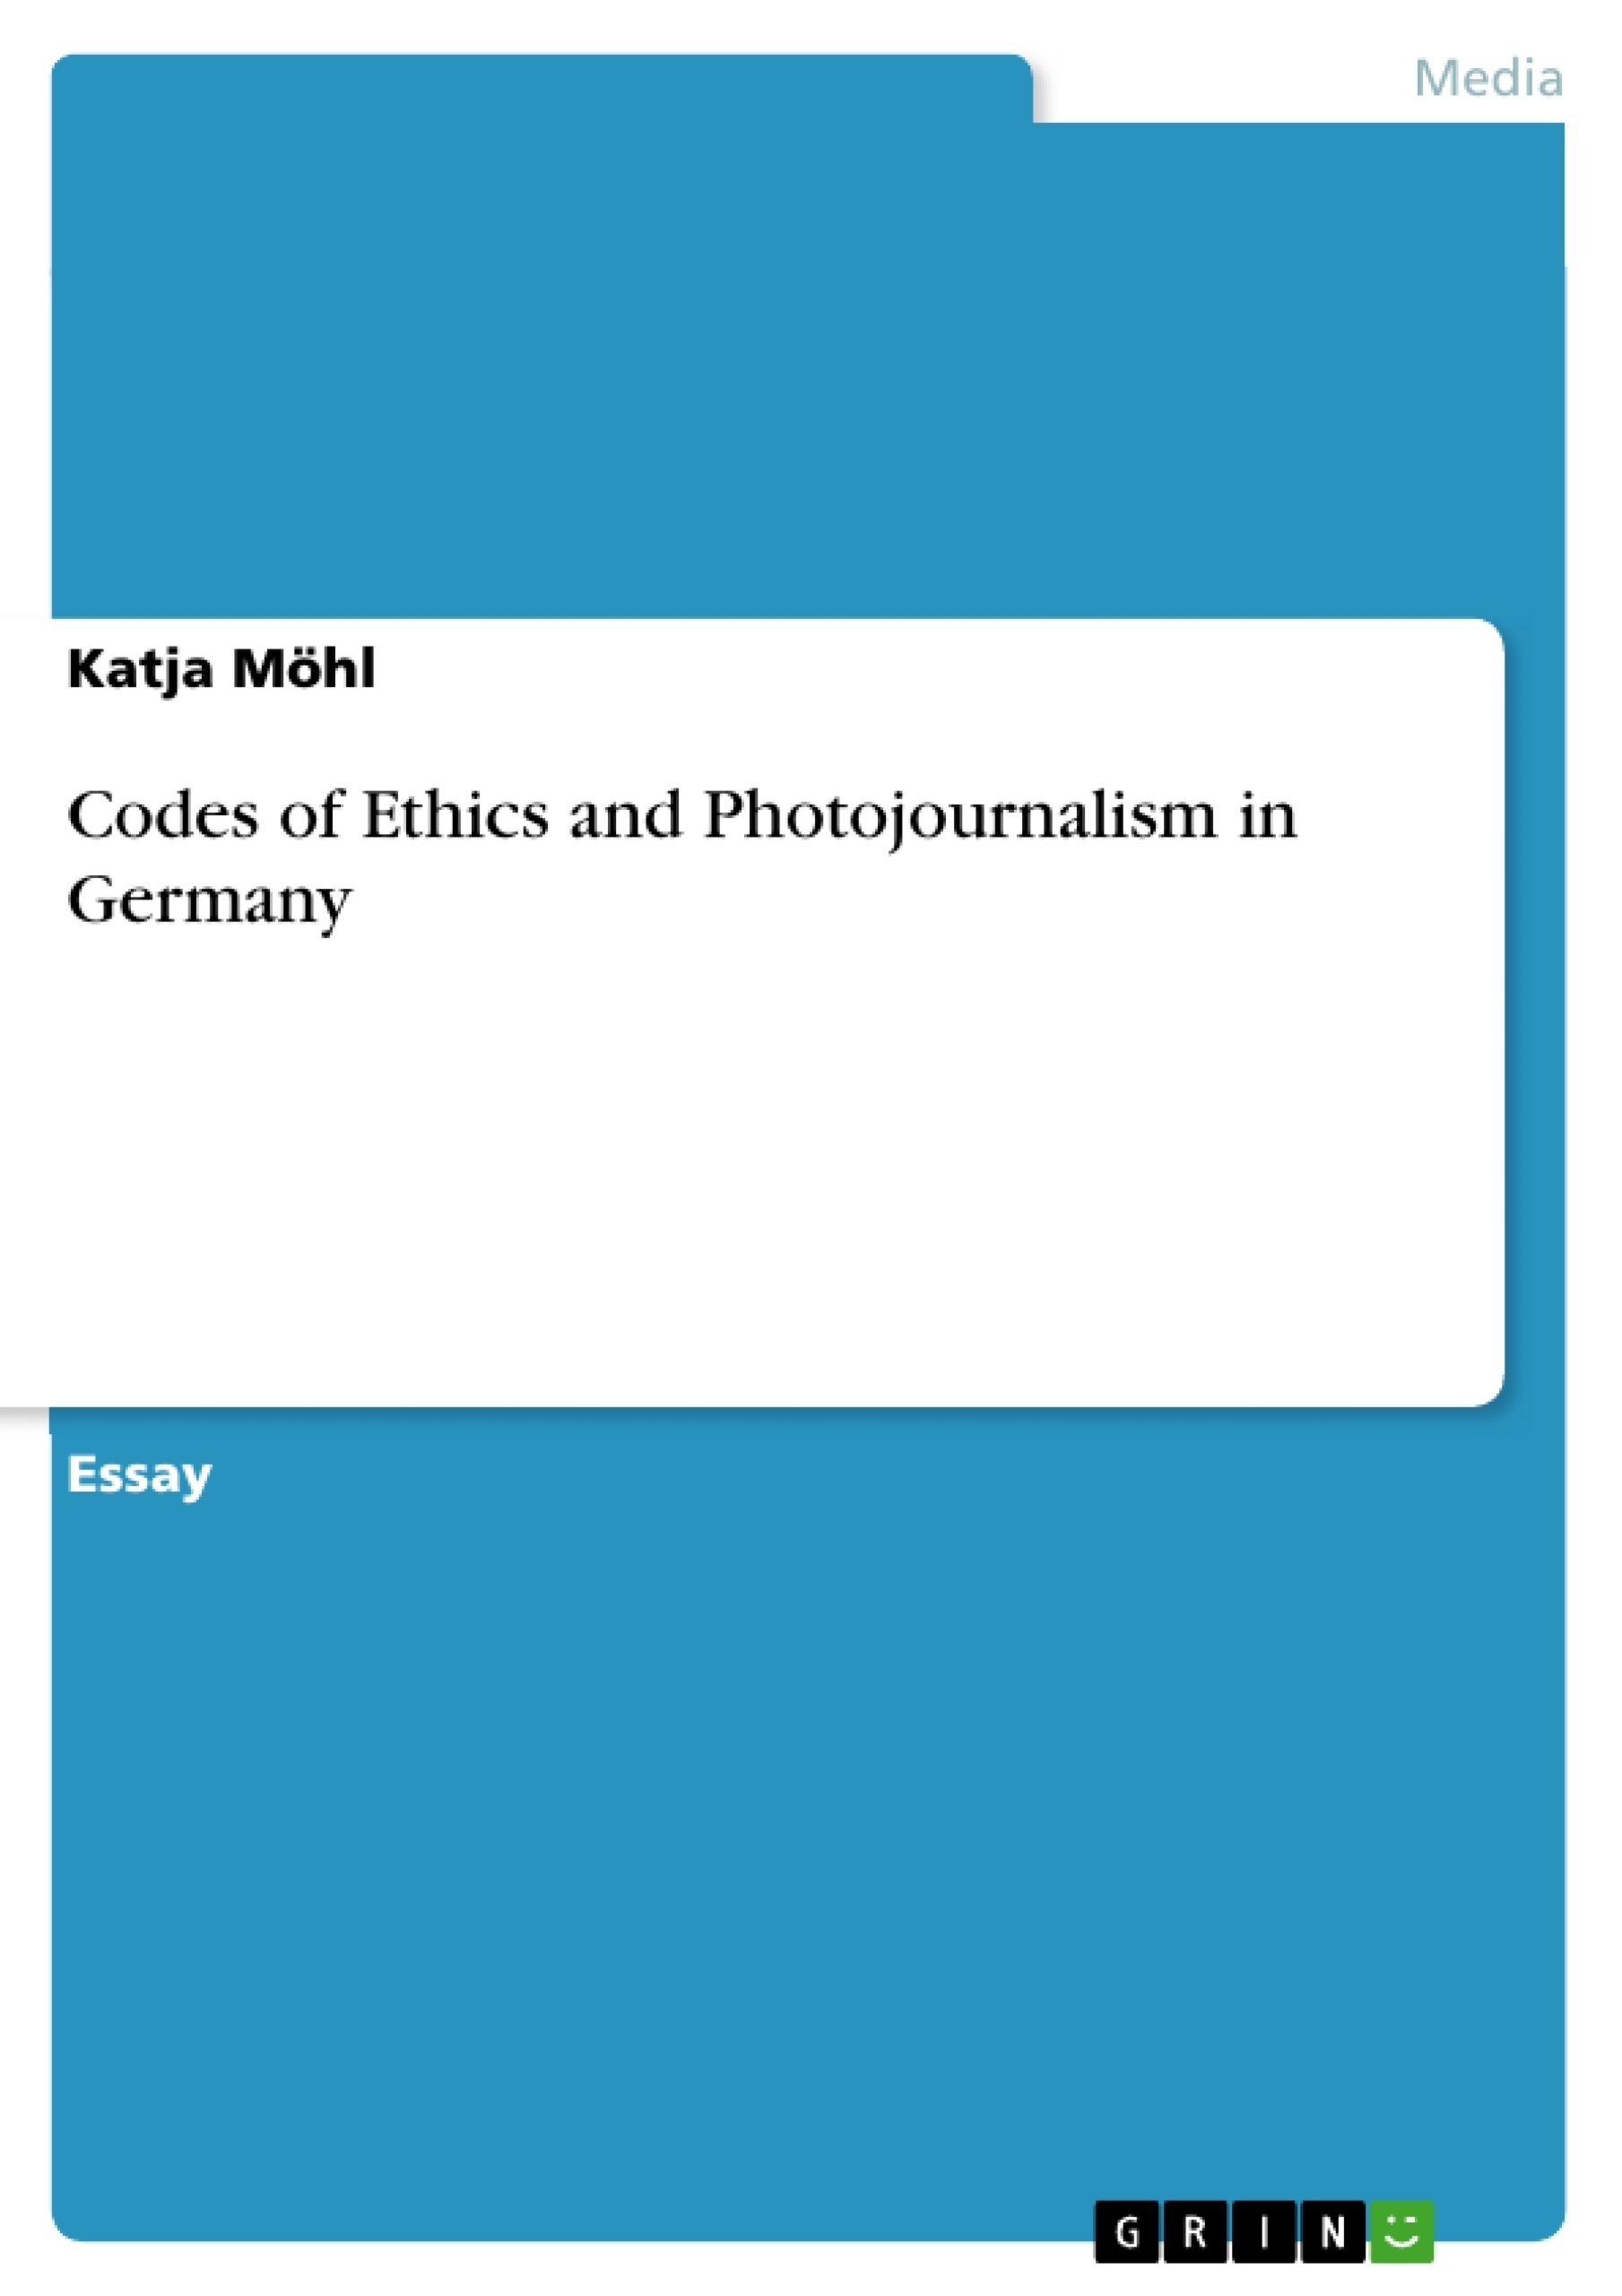 Title: Codes of Ethics and Photojournalism in Germany